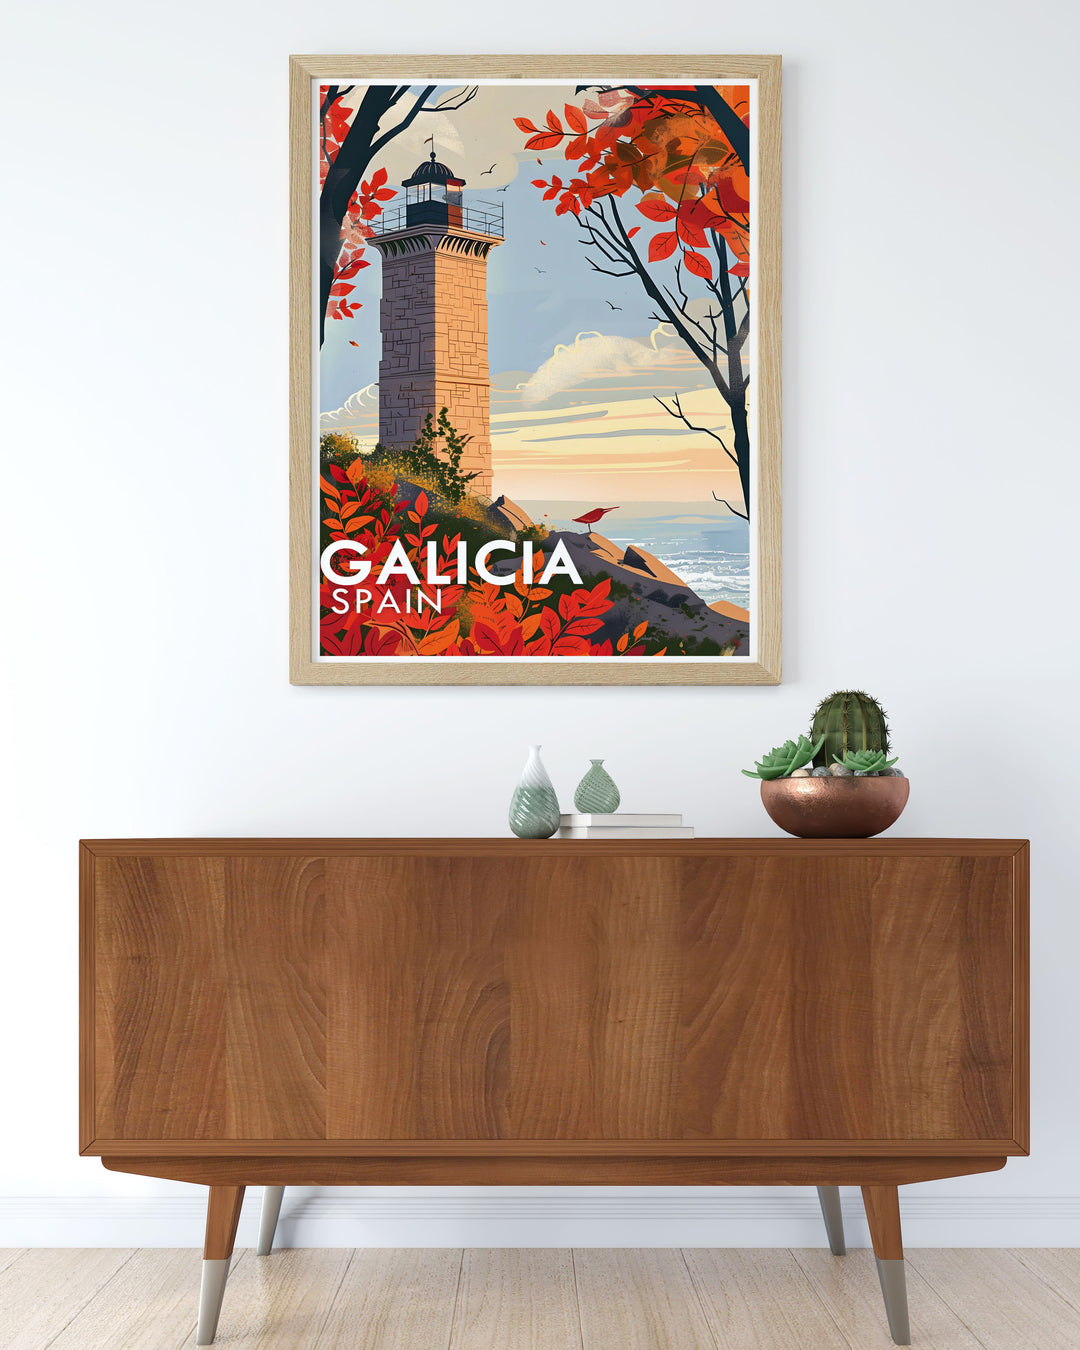 Highlighting the historical significance and architectural beauty of the Tower of Hercules, this print celebrates Galicias heritage.